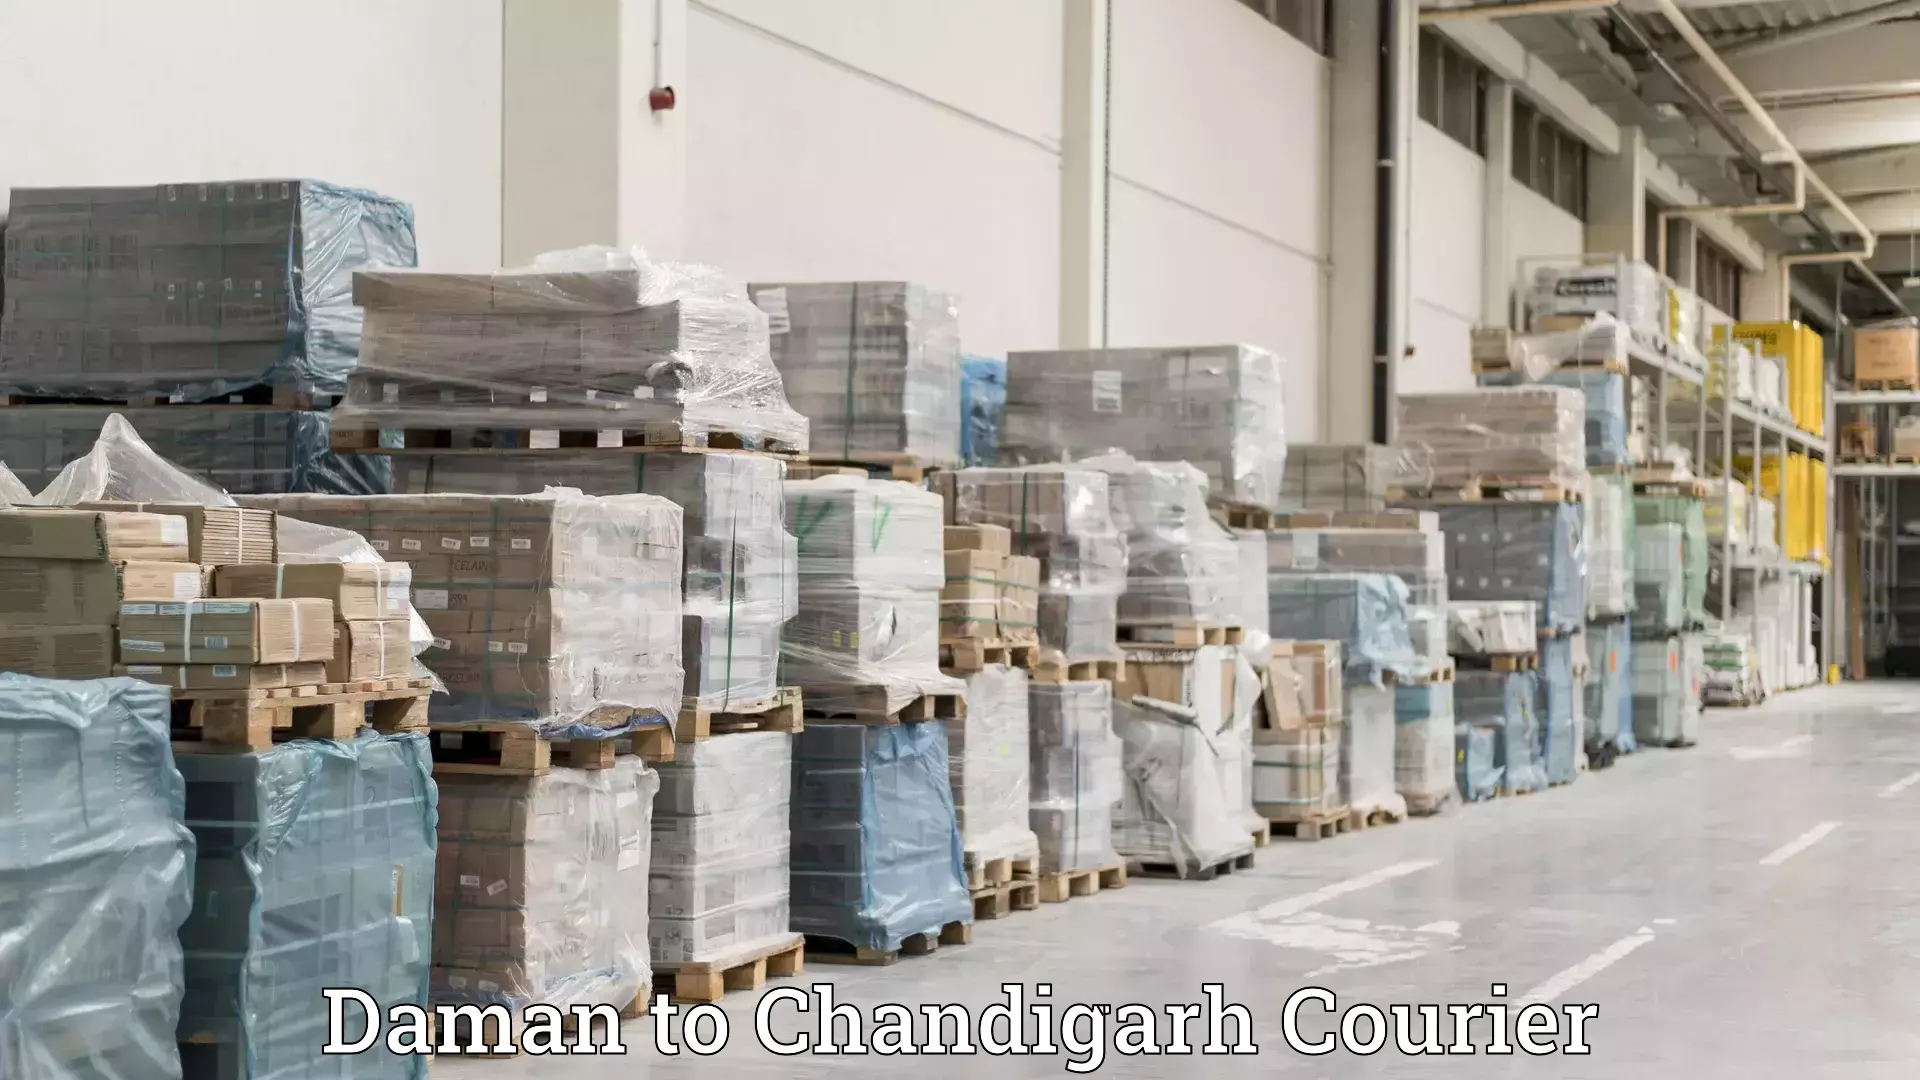 Moving and packing experts Daman to Chandigarh